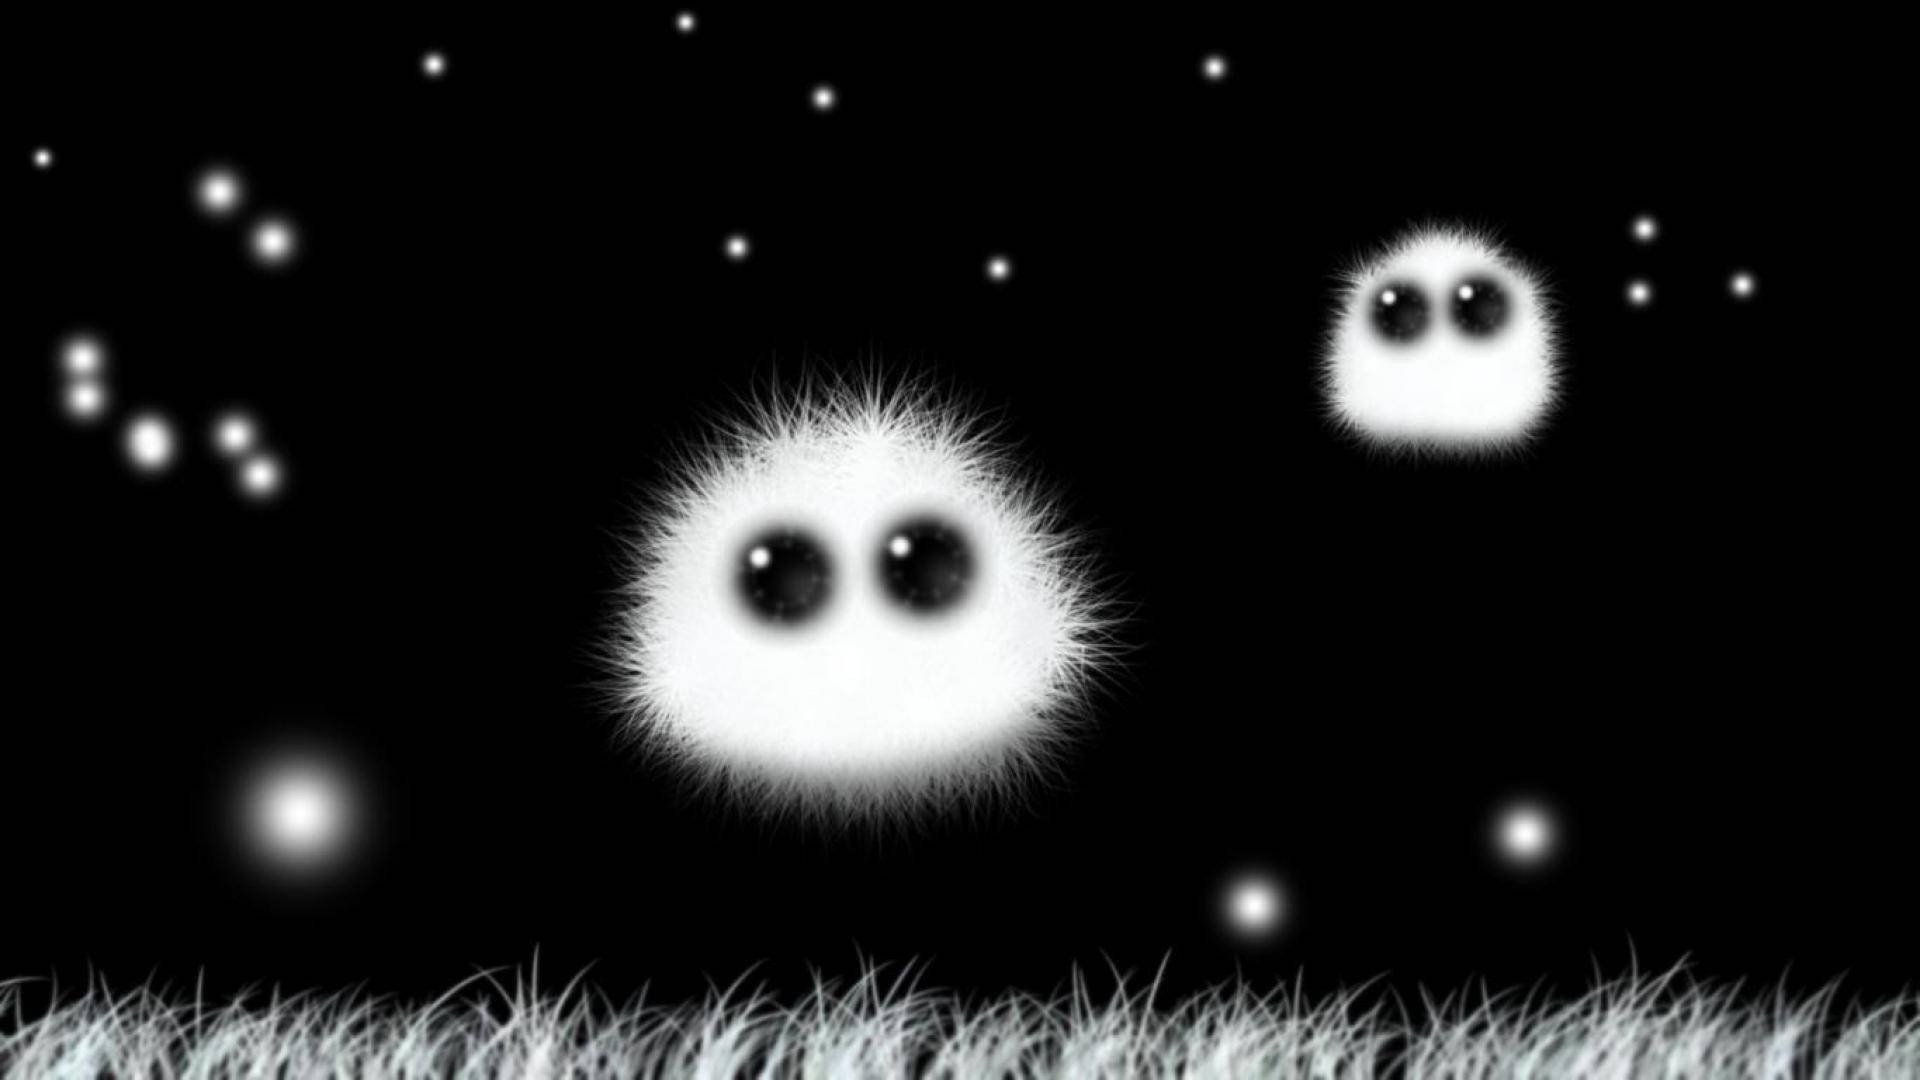 Cute Black And White Aesthetic Fuzzy Creatures Flying